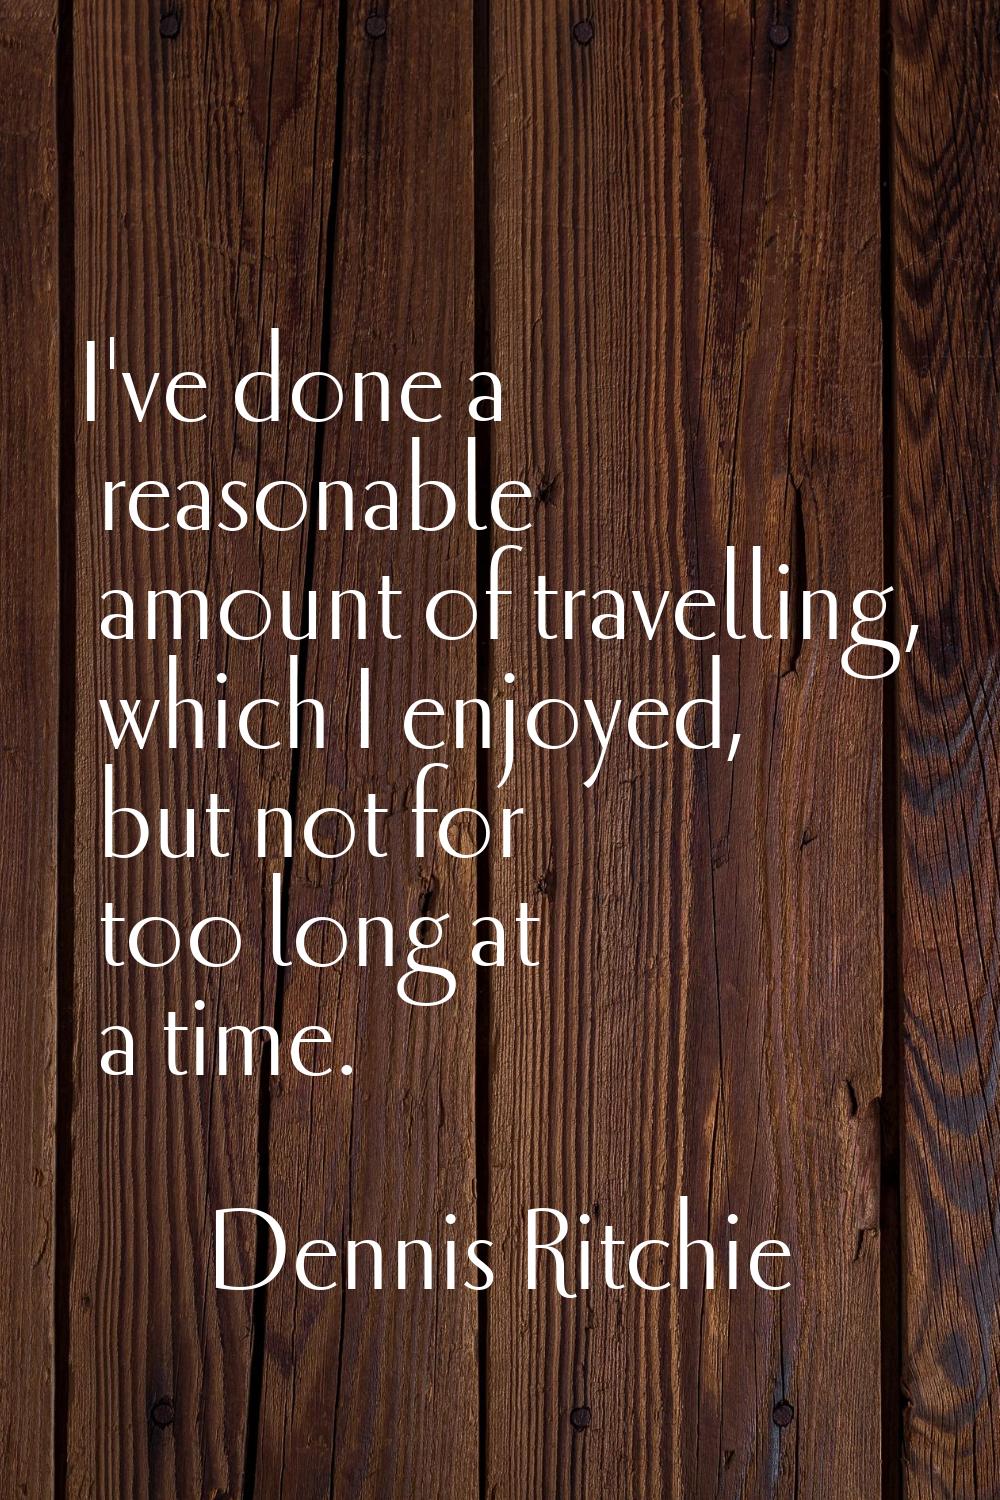 I've done a reasonable amount of travelling, which I enjoyed, but not for too long at a time.